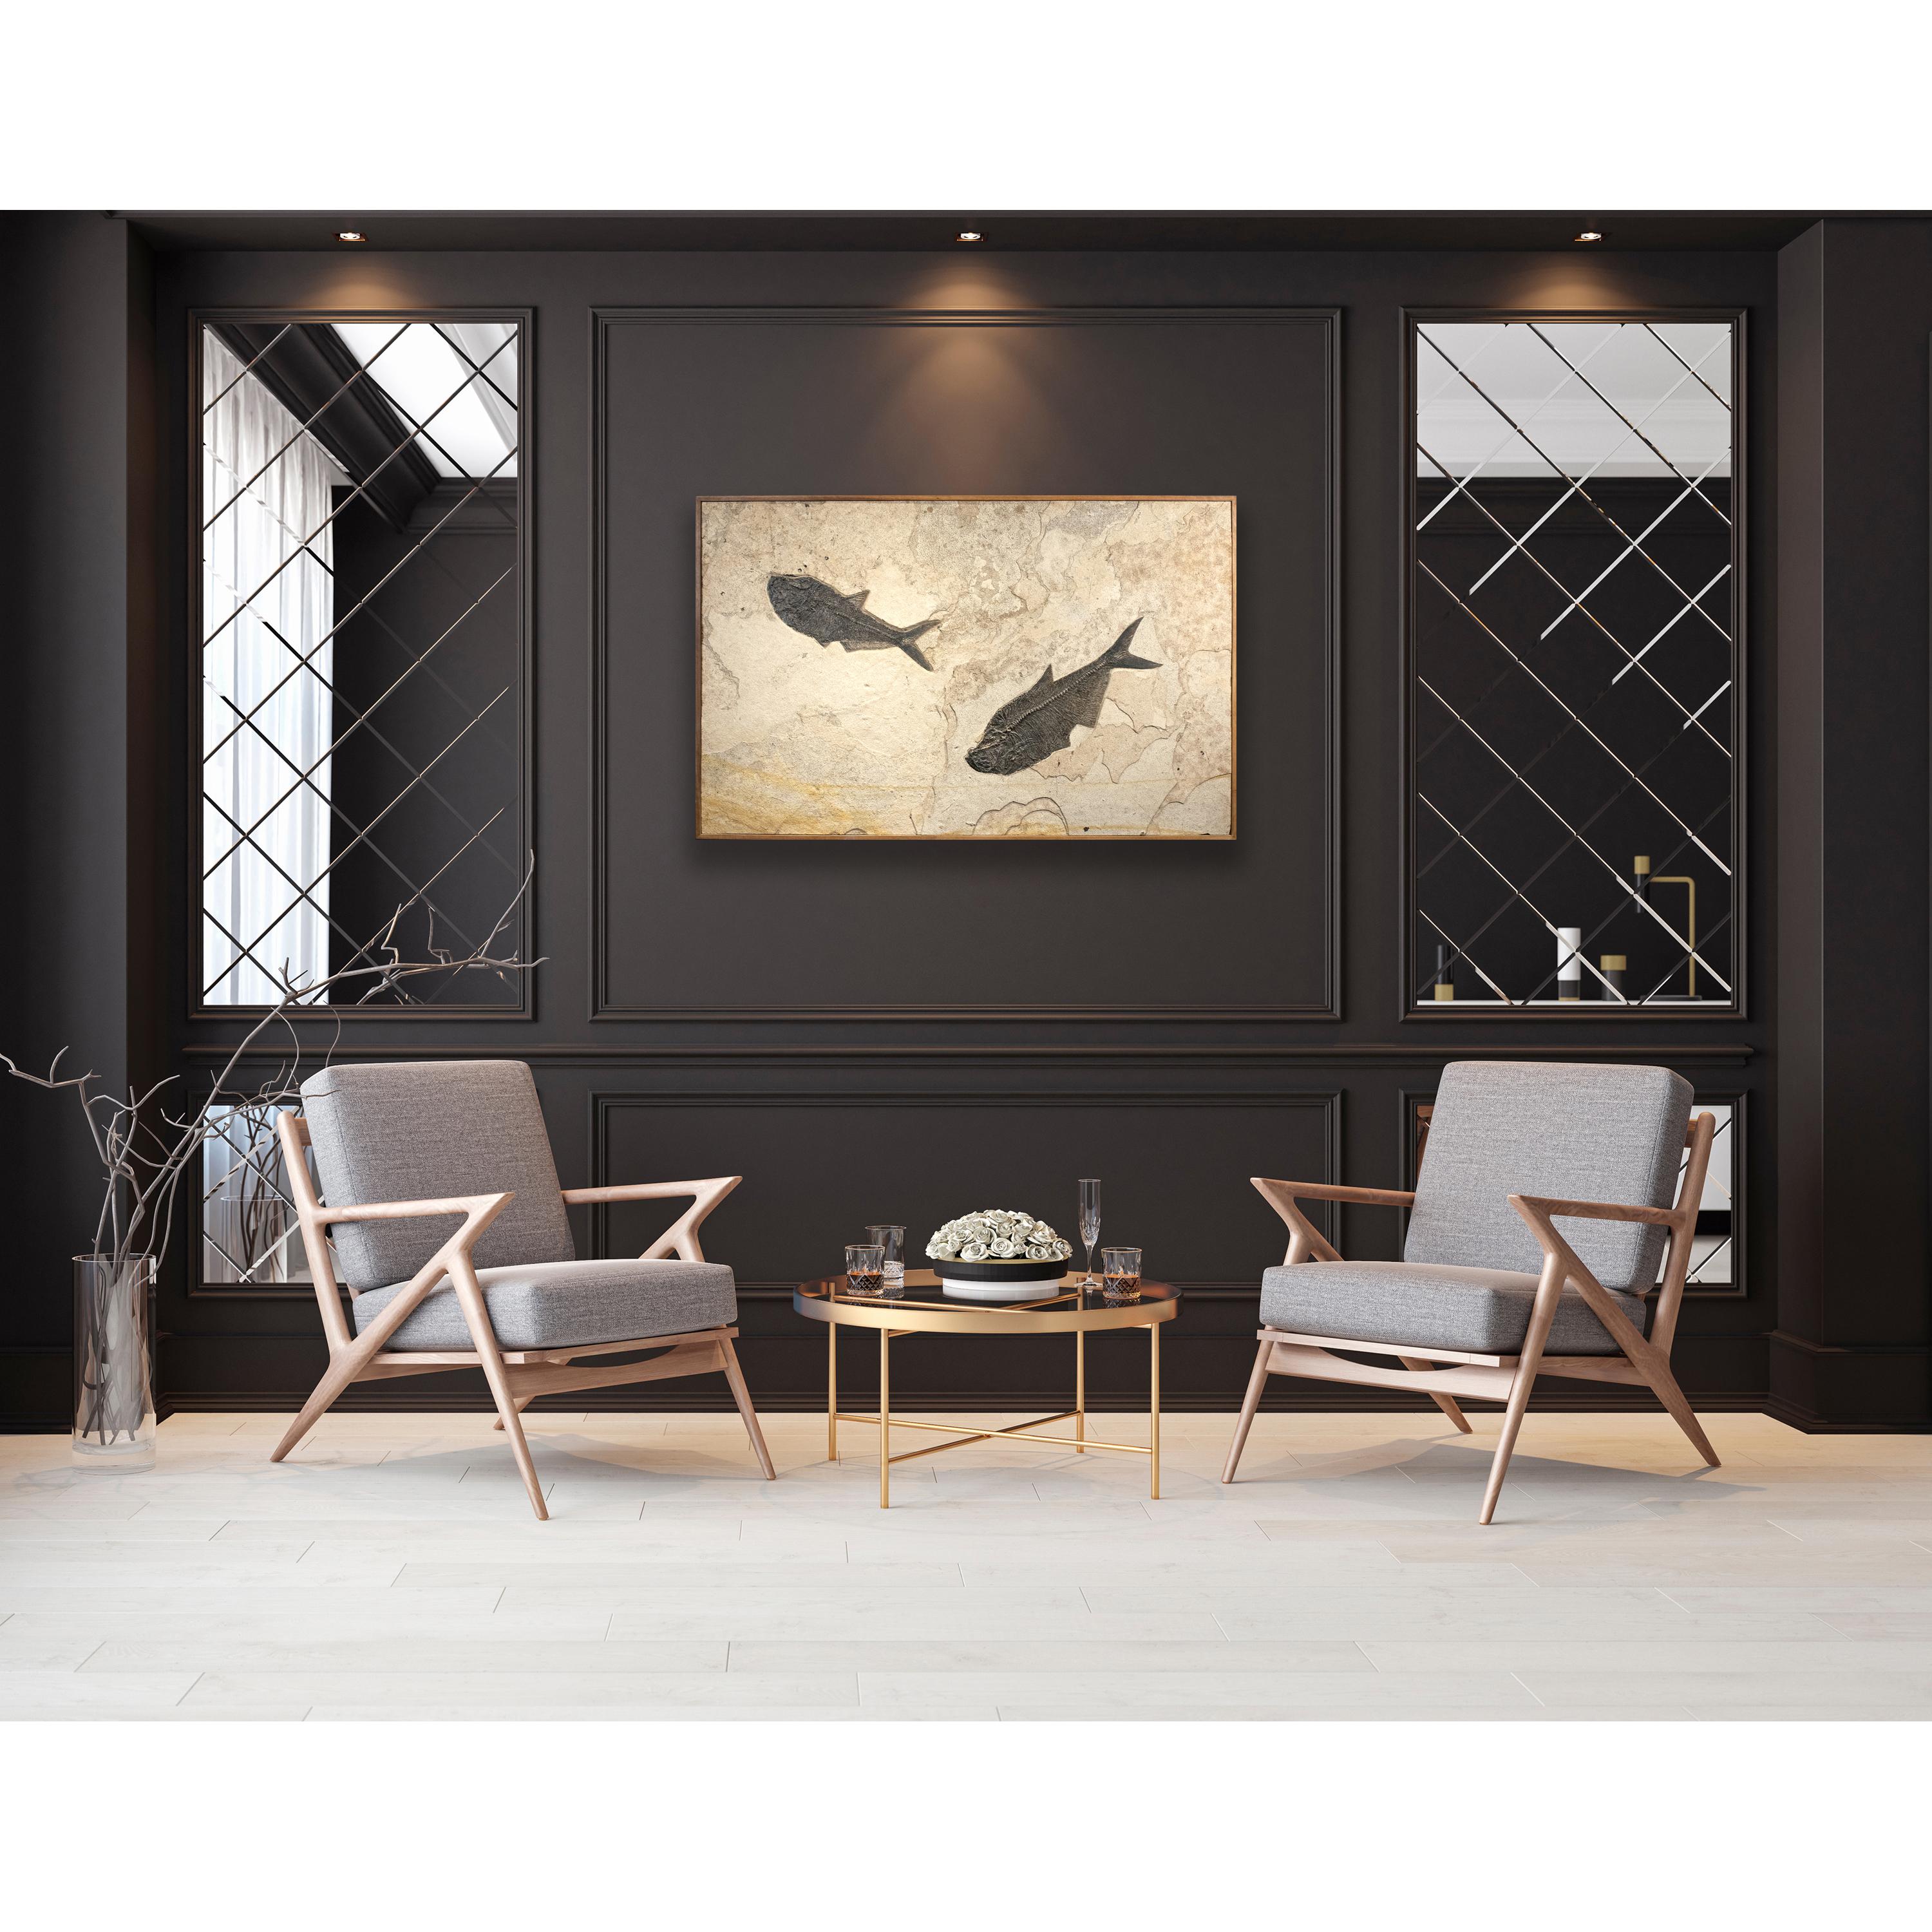 This exquisite fossil mural features two Diplomystus dentatus; these fish are Eocene era fossils dating back about 50 million years. These ancient fish are forever preserved in a sculptural matrix of natural, fossil-bearing limestone. This dramatic